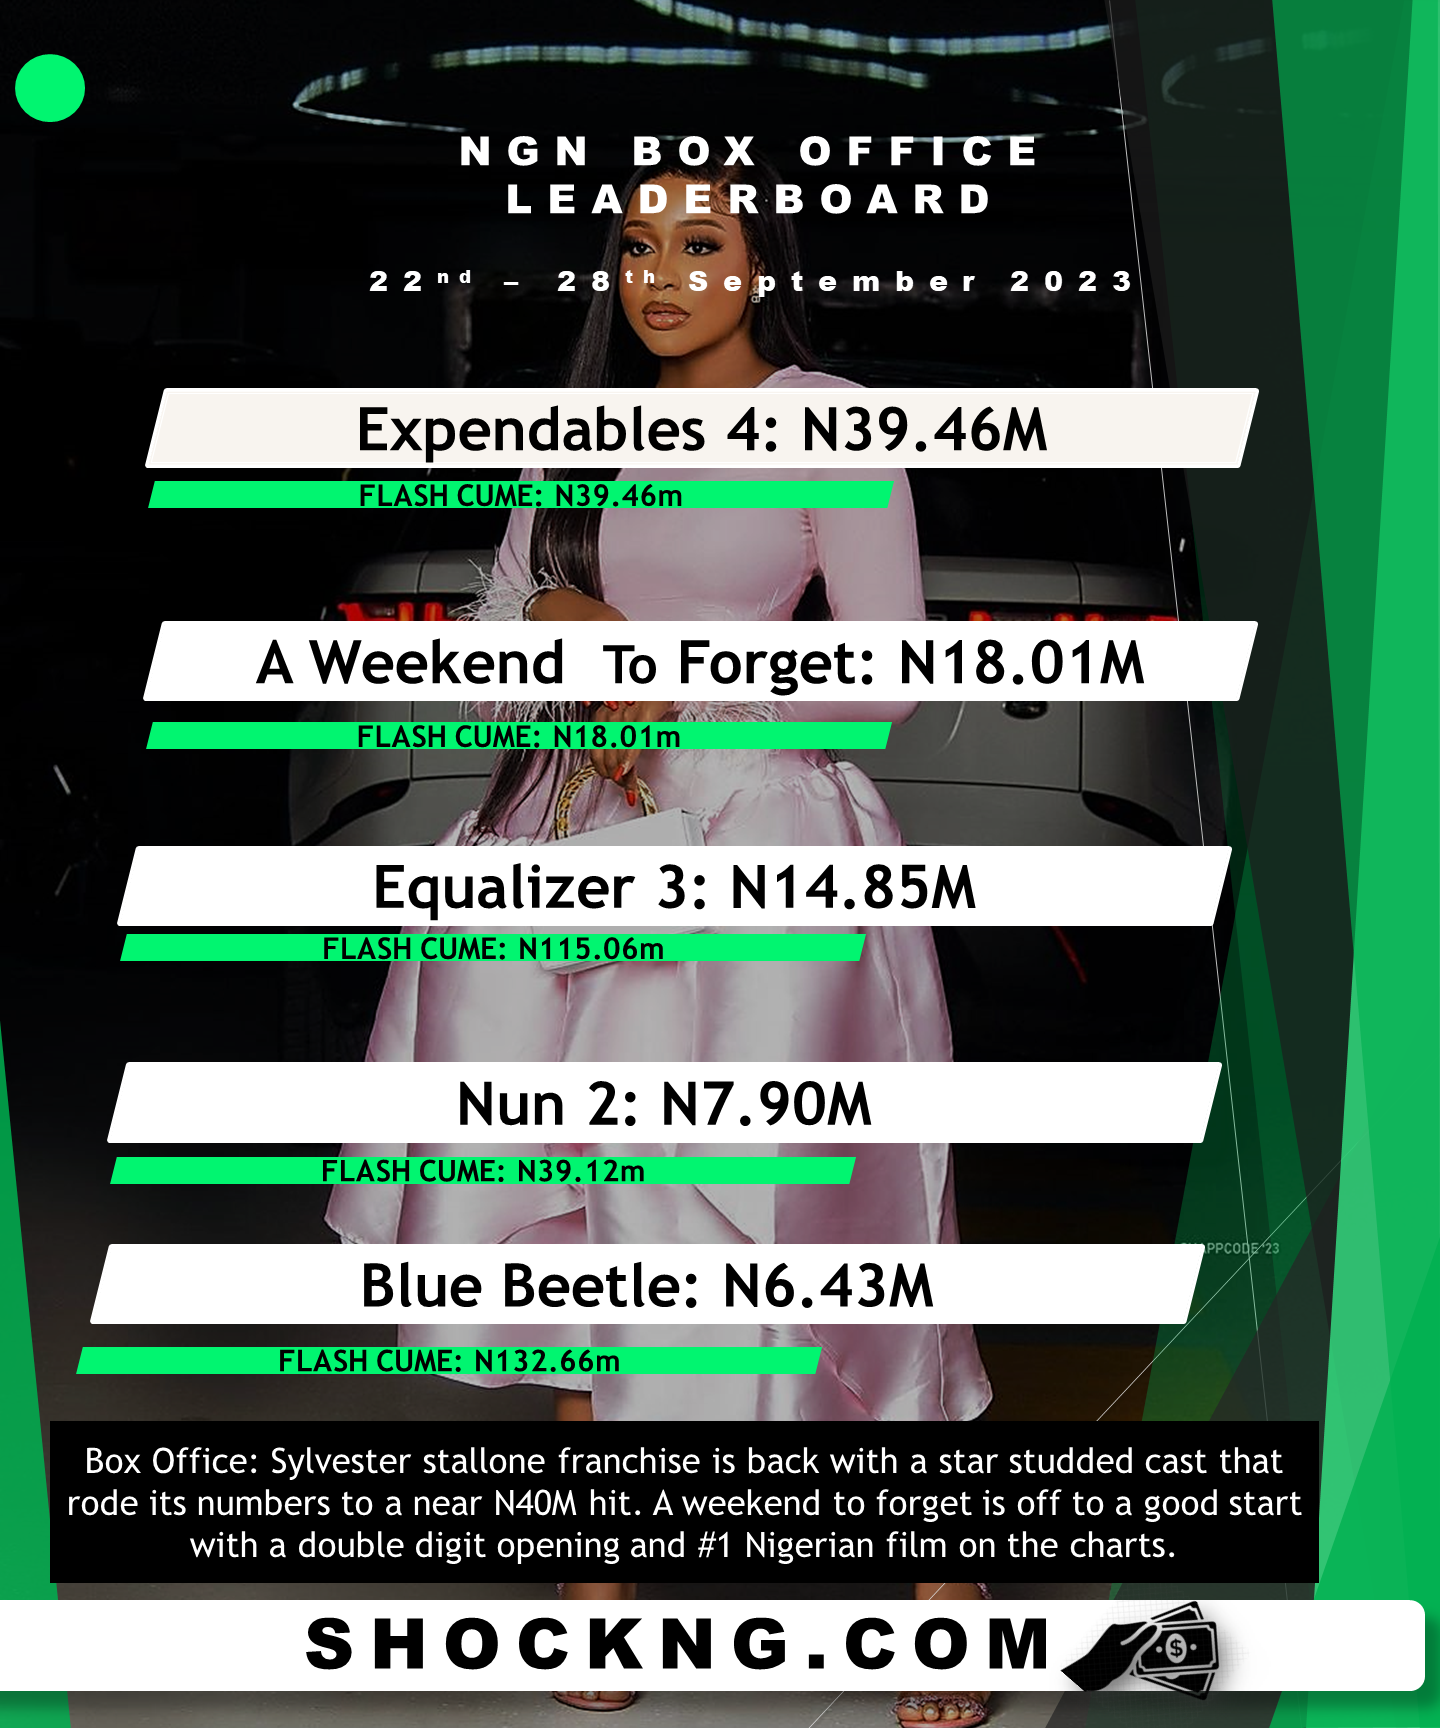 top 5 last week sept box office - InkBlot’s “A Weekend to Forget” Scores Decent N18 Million For 7-Day Opening Week Earnings